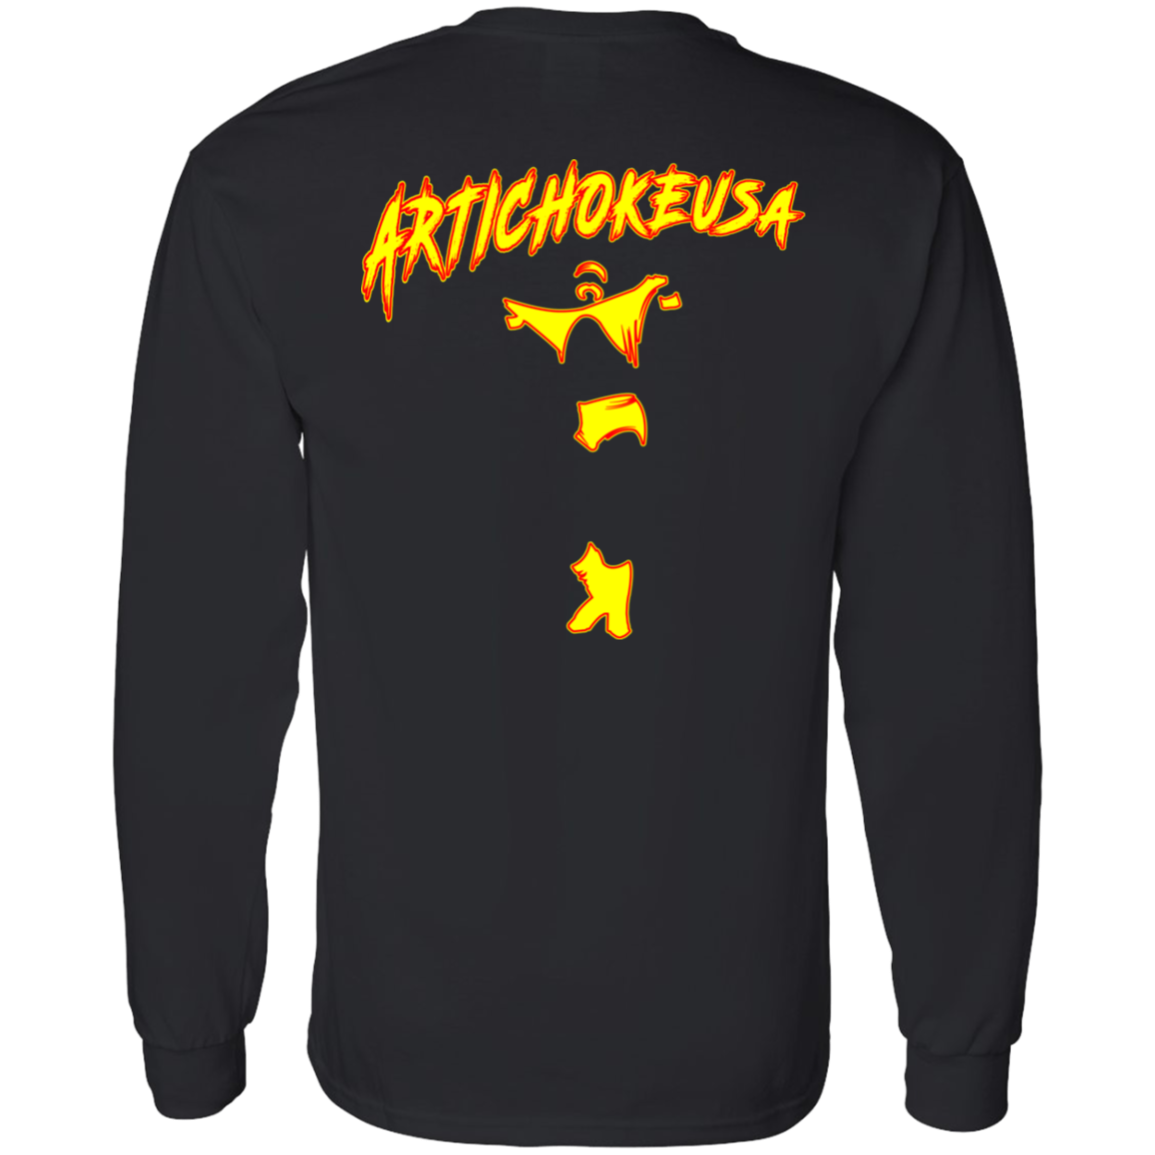 ArtichokeUSA Character and Font Design. Let’s Create Your Own Design Today. Fan Art. The Hulkster. 100 % Cotton LS T-Shirt